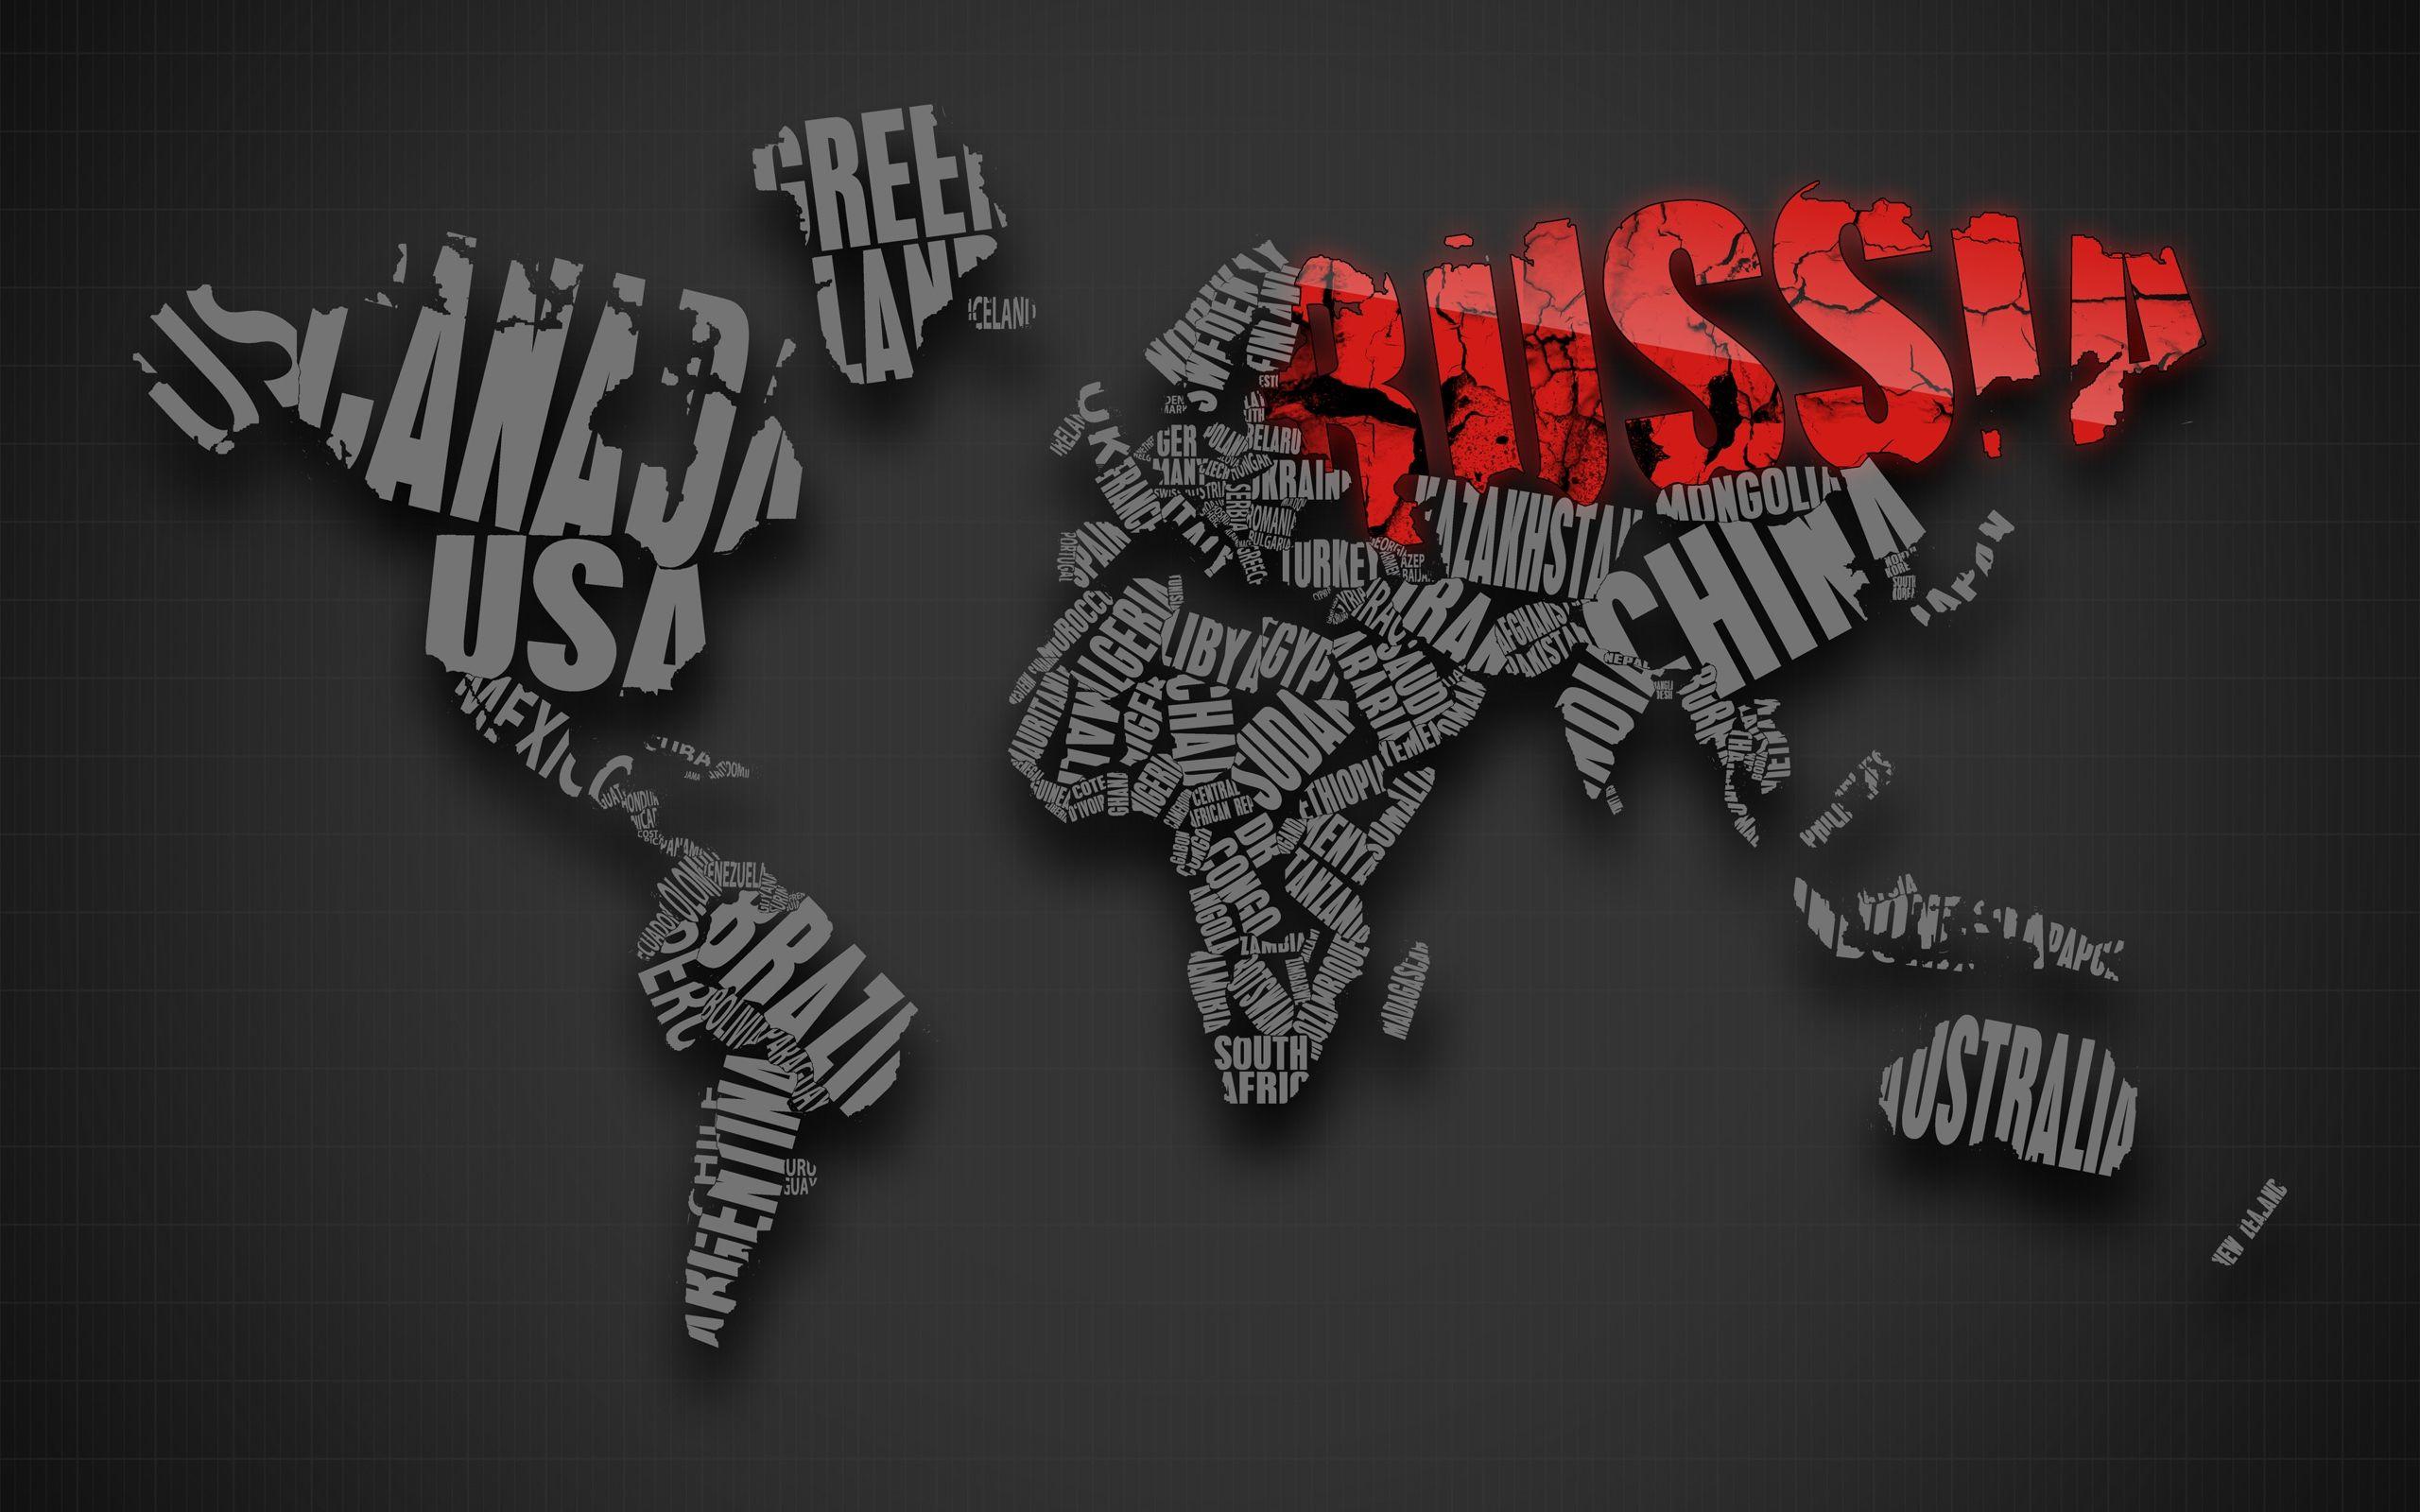 Russia on the Map wallpaper and image, picture, photo